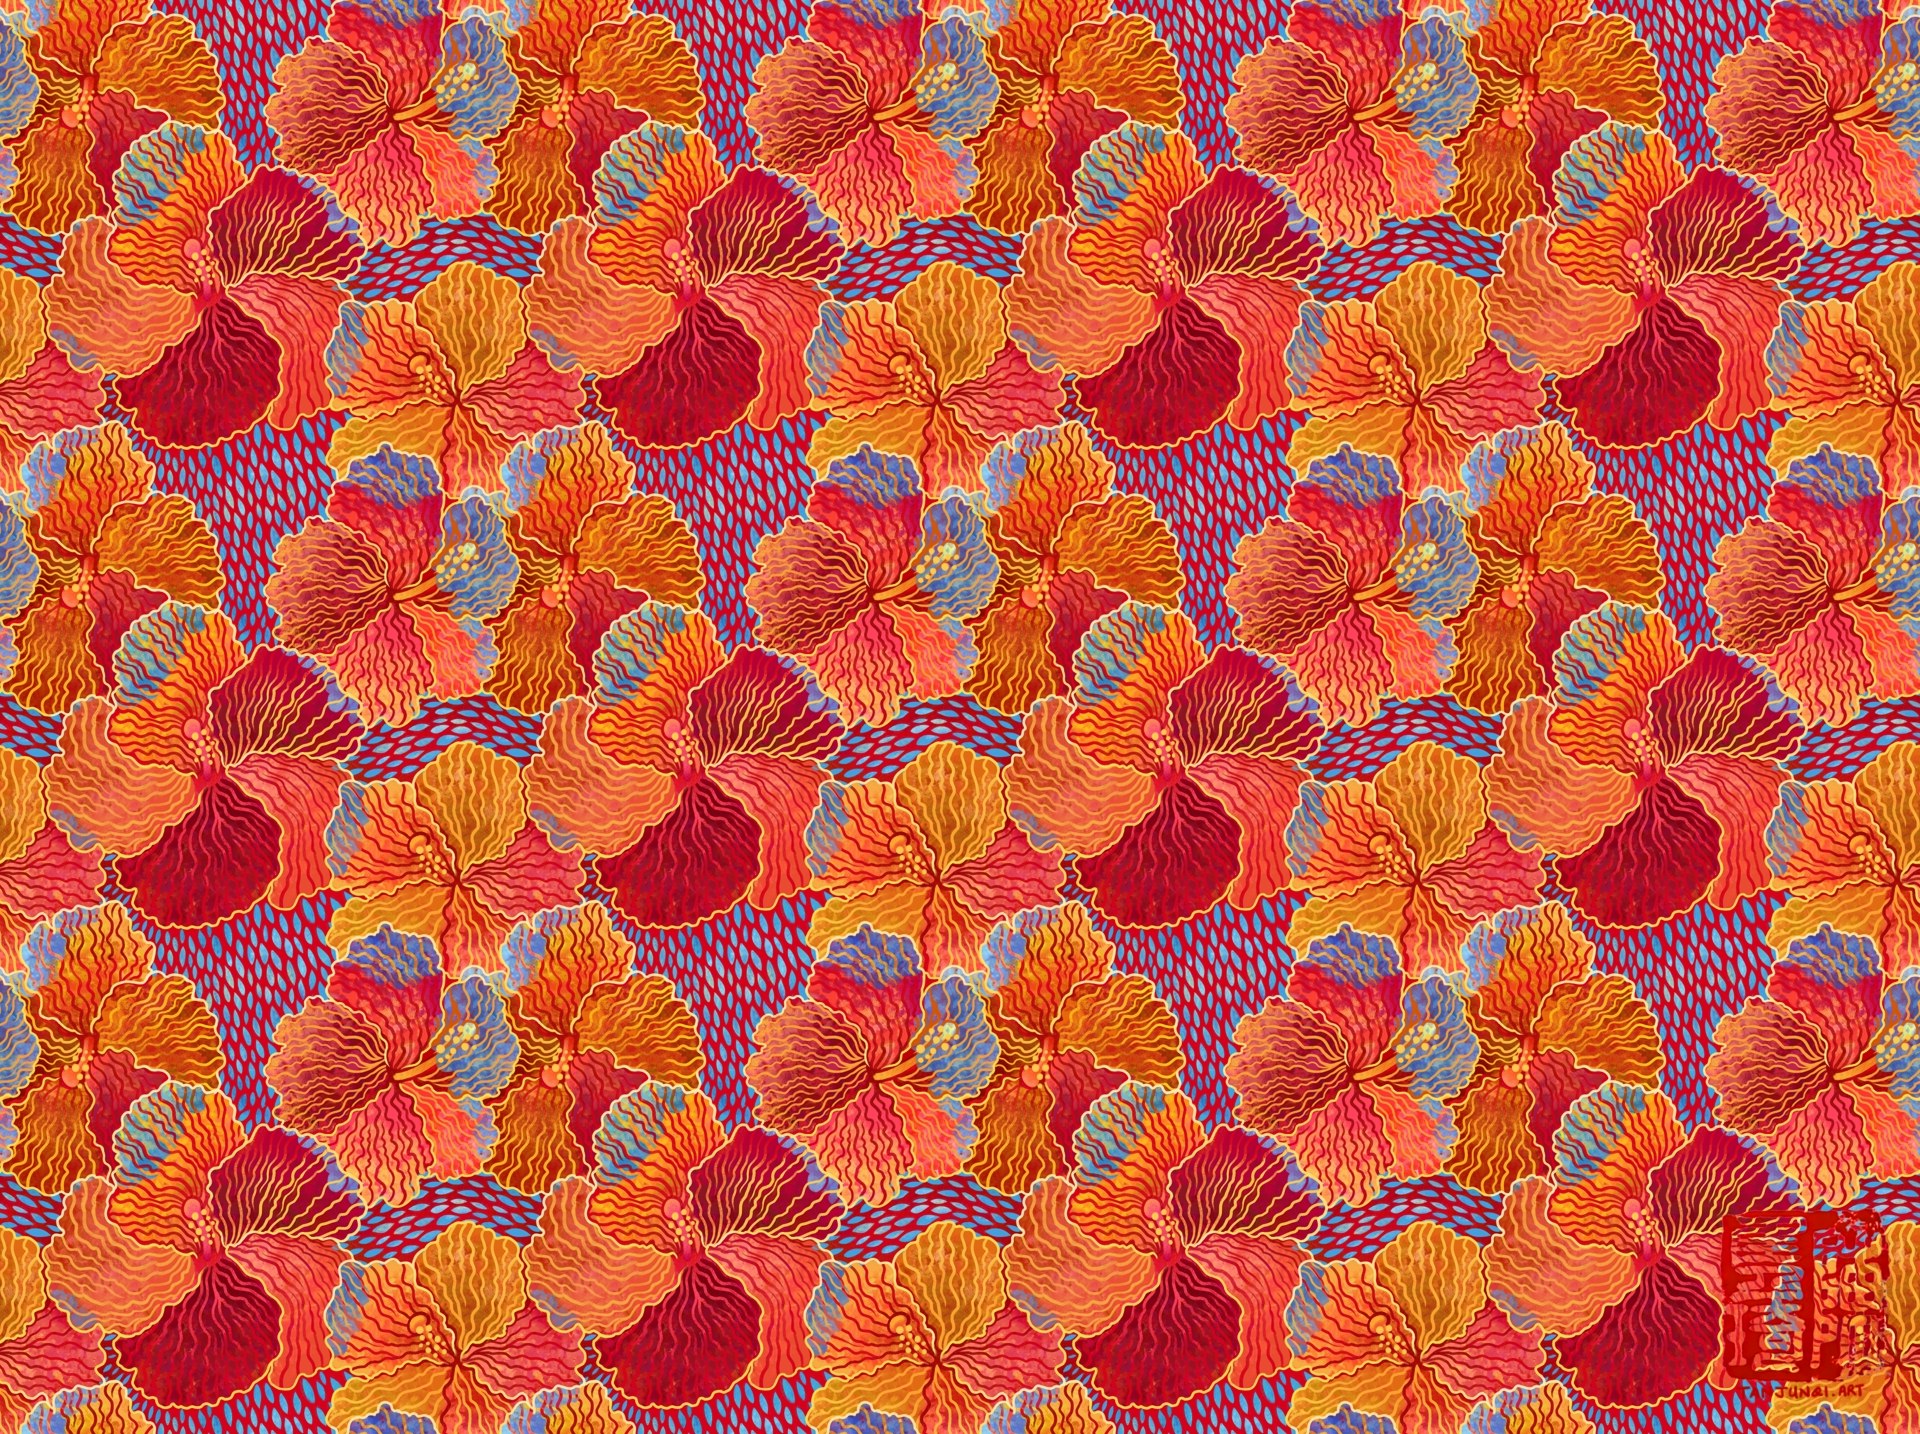 Digitally painted floral design of overlapping red hibiscuses, done in a slightly graphic and textured style inspired by batik and Chinese papercuts. The hibiscus are different hues of red and magenta, while the outlines are golden, and their overlapping parts are blue, against a background with a dark blue pattern. The design is tiled across a larger area